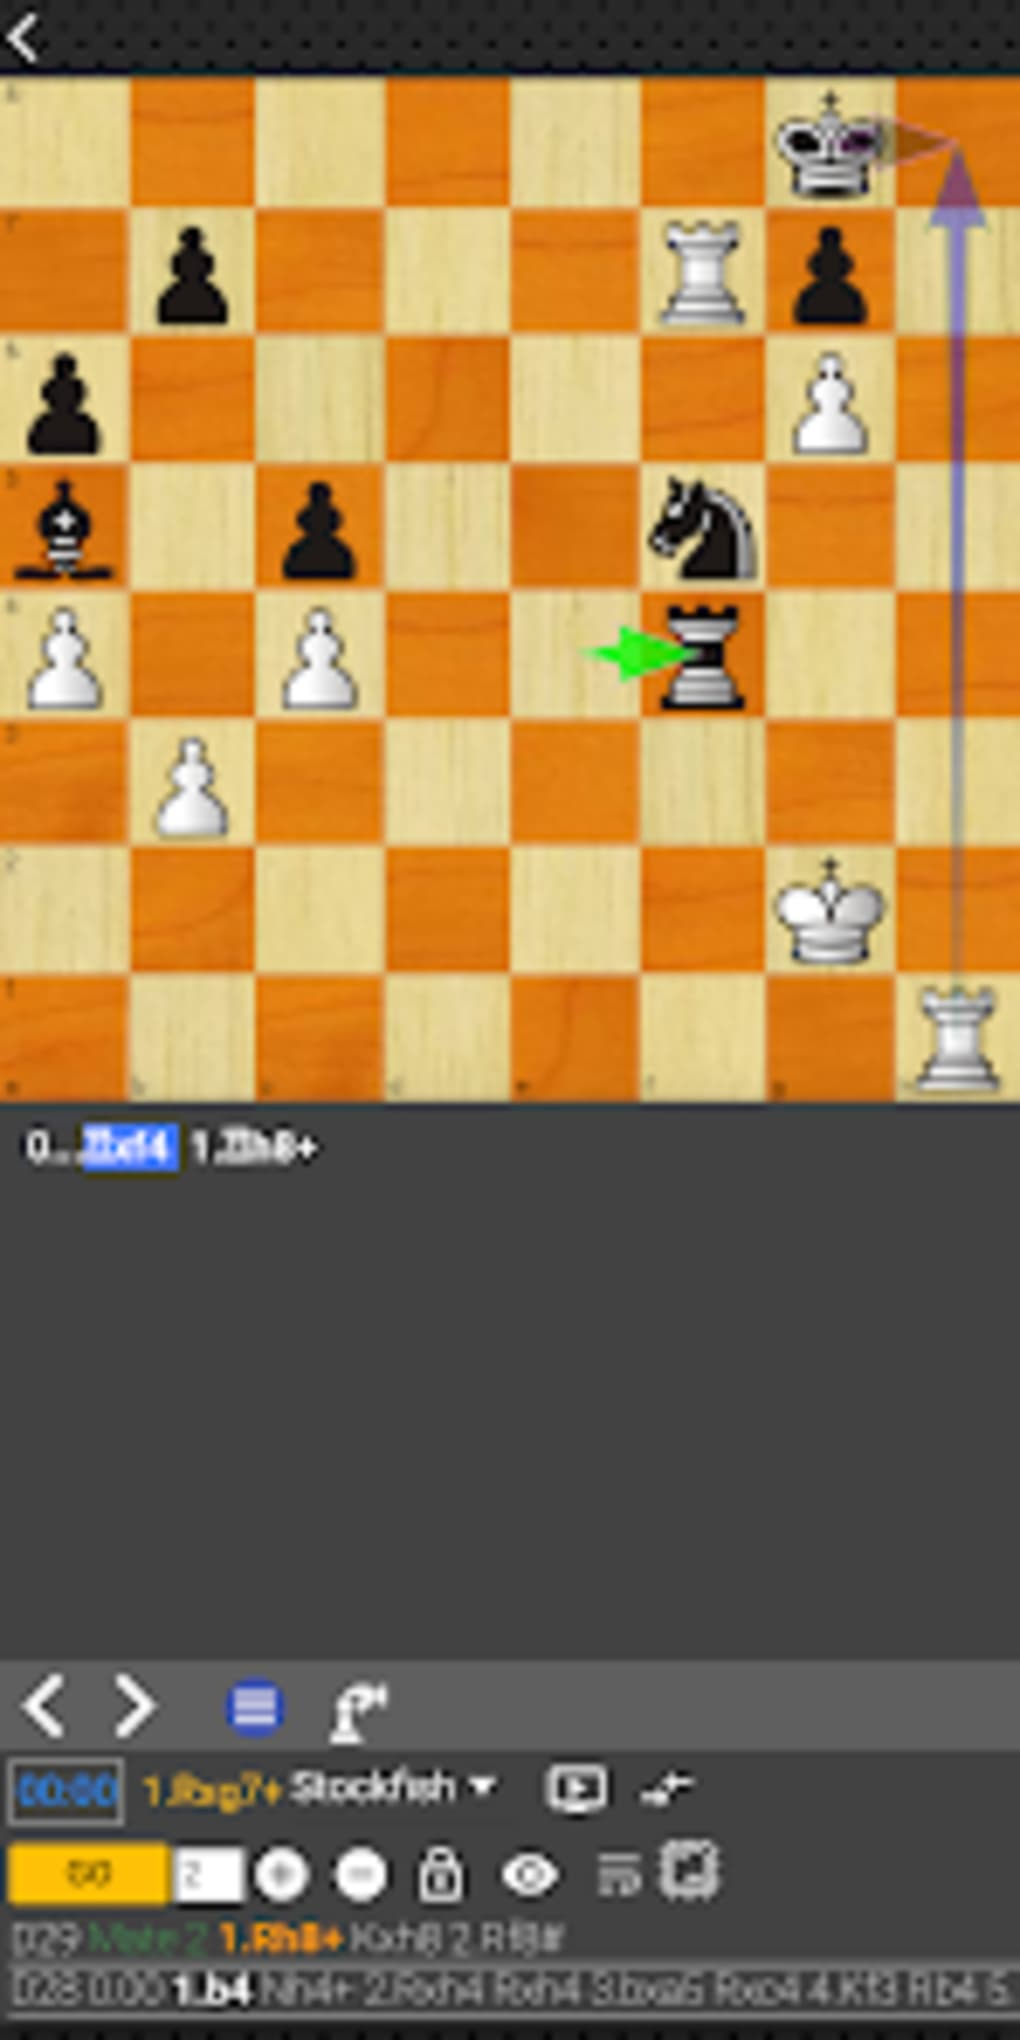 Chess tempo - Train chess tact for Android - Download